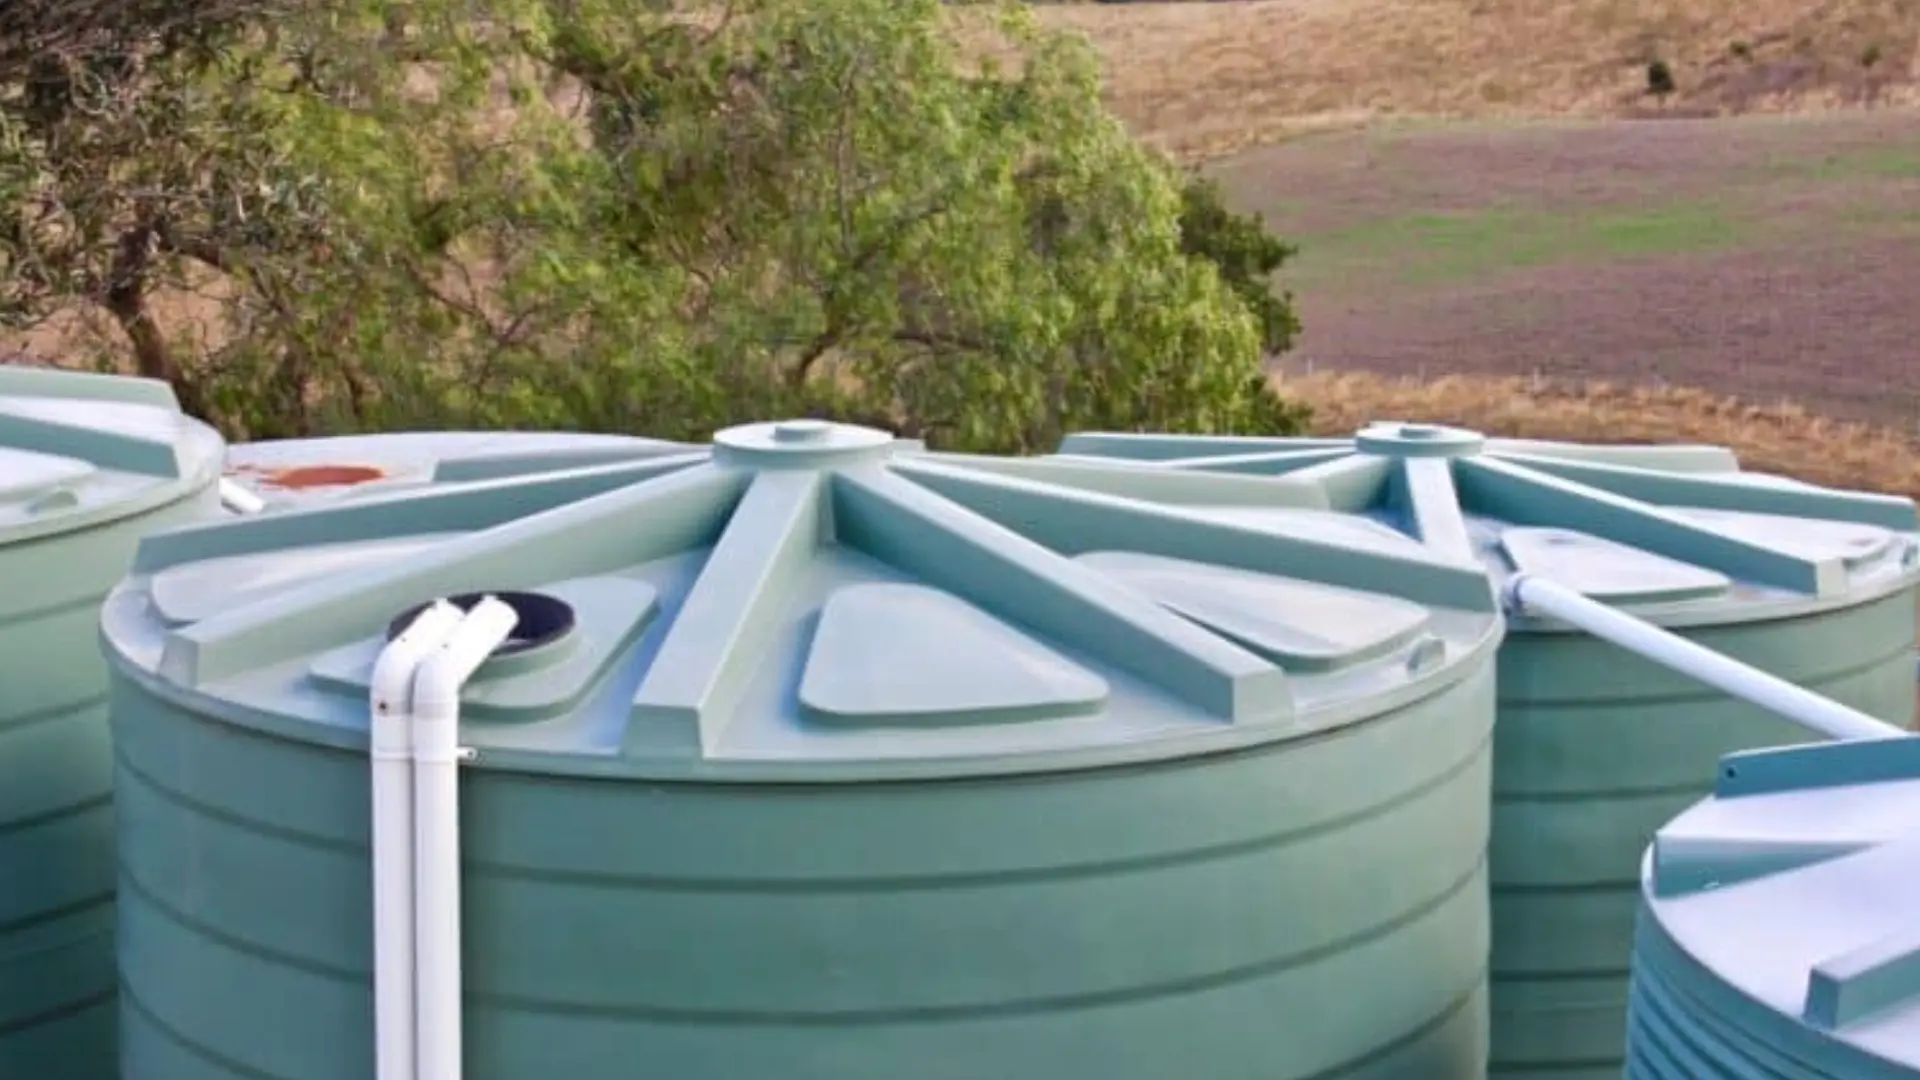 How Can You Purify Rainwater in a Non-Survival Situation